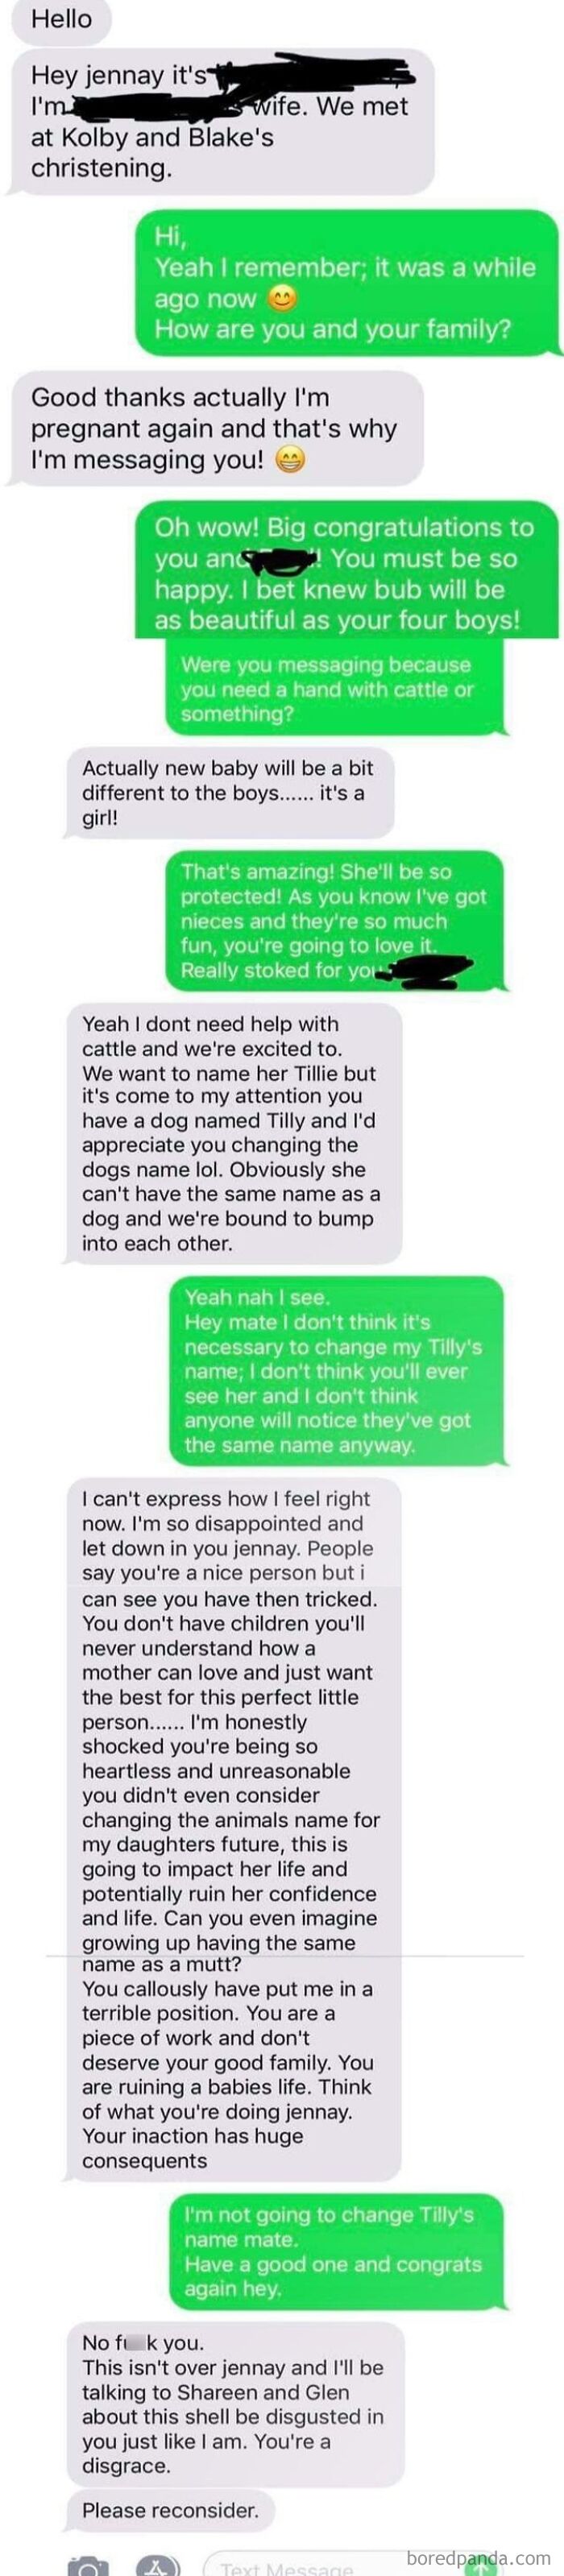 Change Your Dog's Name, Or My Unborn Baby's Life Will Be Ruined